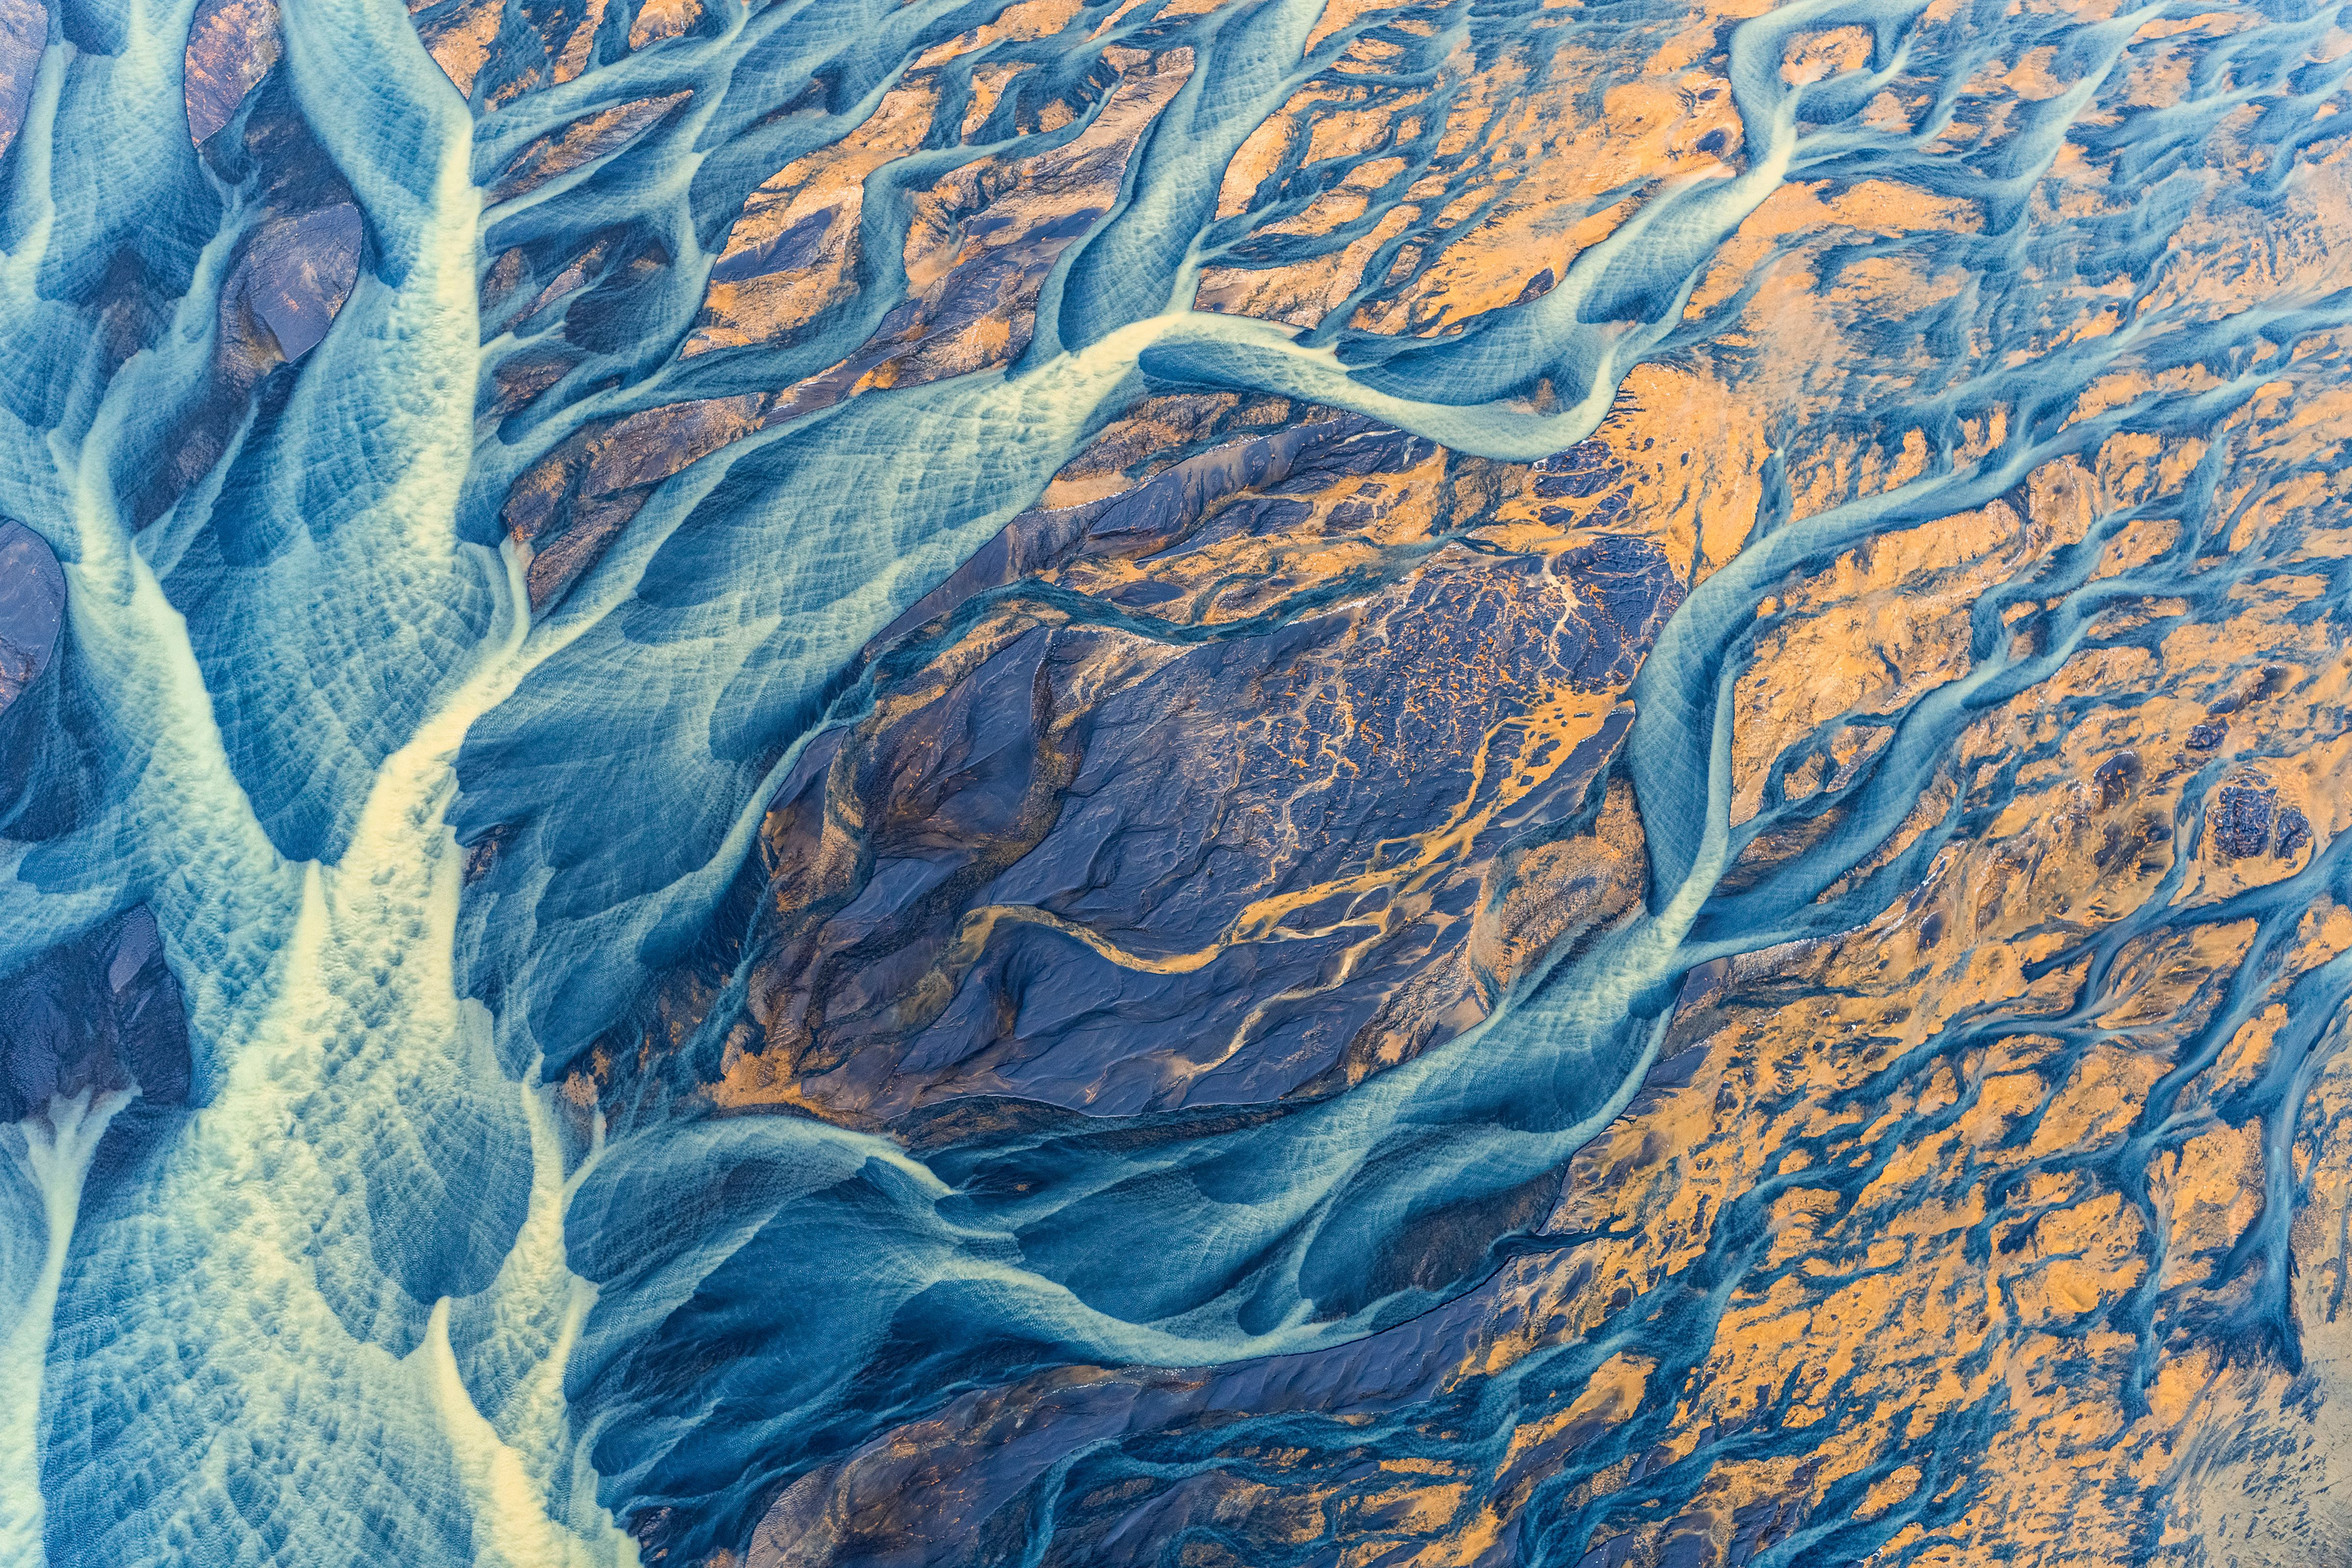 'Braided River'. Brightly colored sediment paints the Icelandic landscape as at flows towards the ocean. The glacial river, Þjórsá, is the longest river in Iceland, originating at Hofsjökull glacier and meandering 230km to the Atlantic Ocean. The aerial perspective provided by a small airplane, reveals the bright and varied colored sediment tracing the river's path towards the ocean. © Kristin Wright/TNC Photo Contest